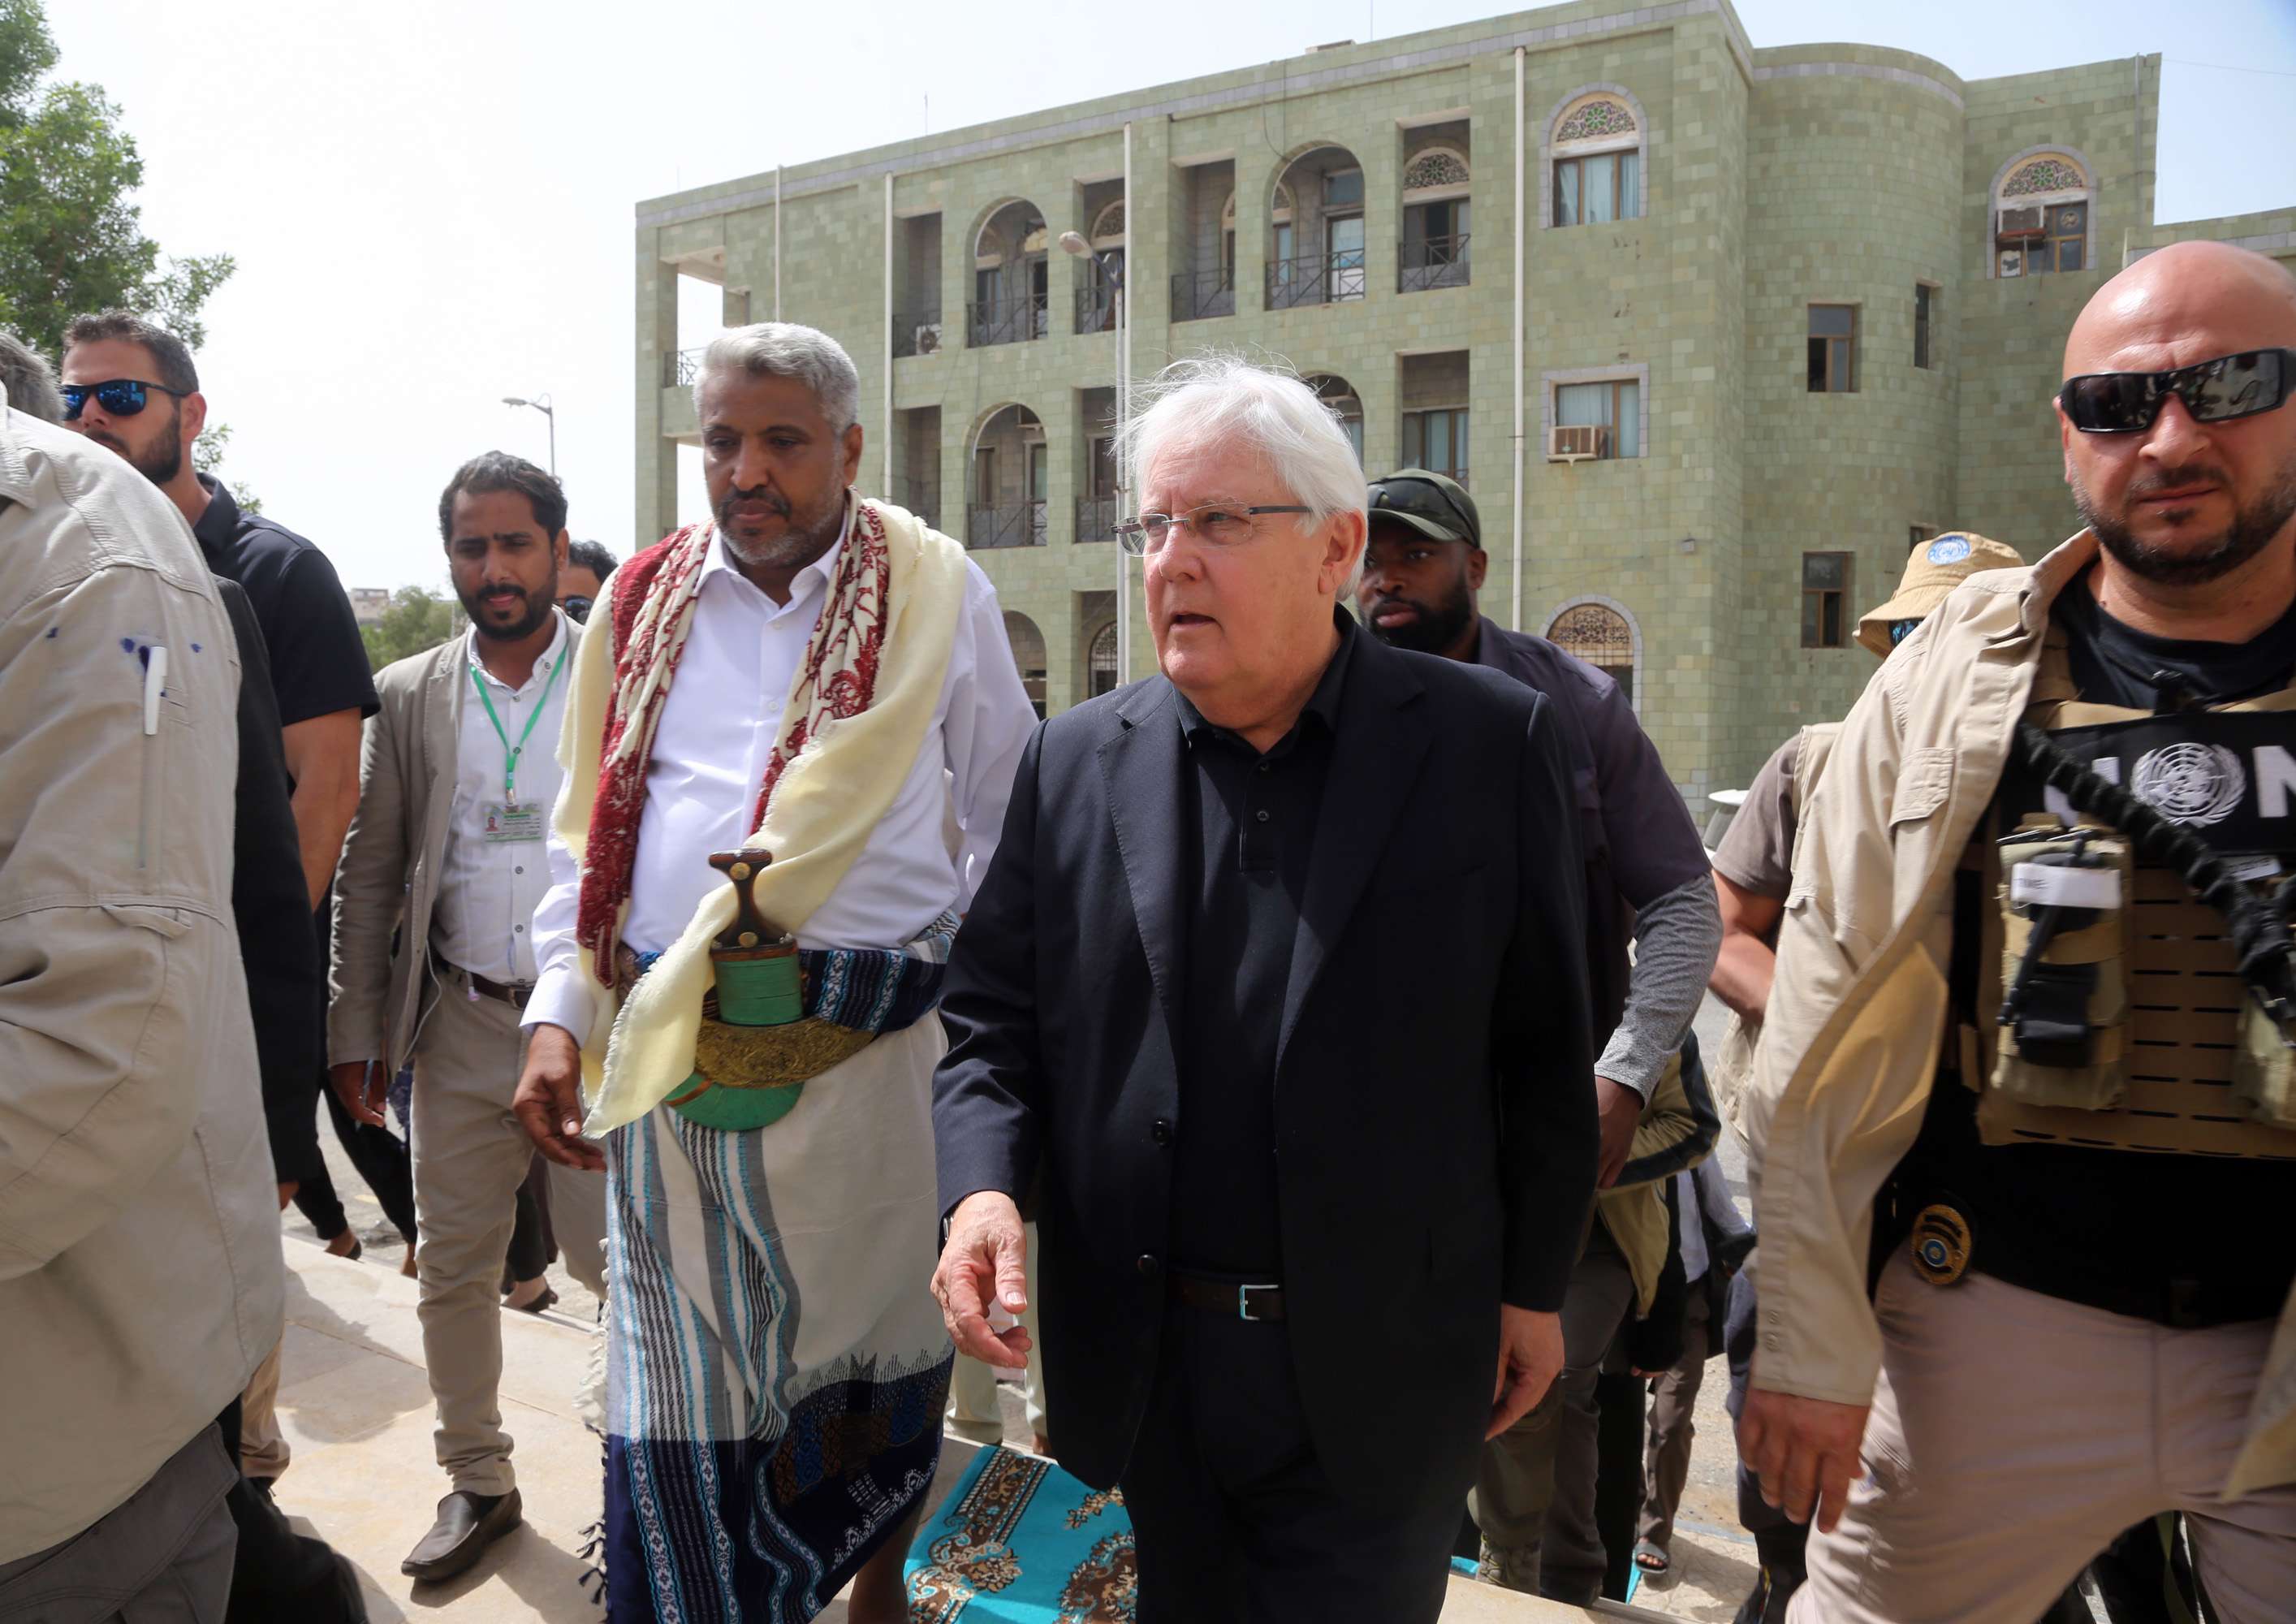 Griffiths said he was laying the groundwork for broader serious negotiations on ending the war in Yemen